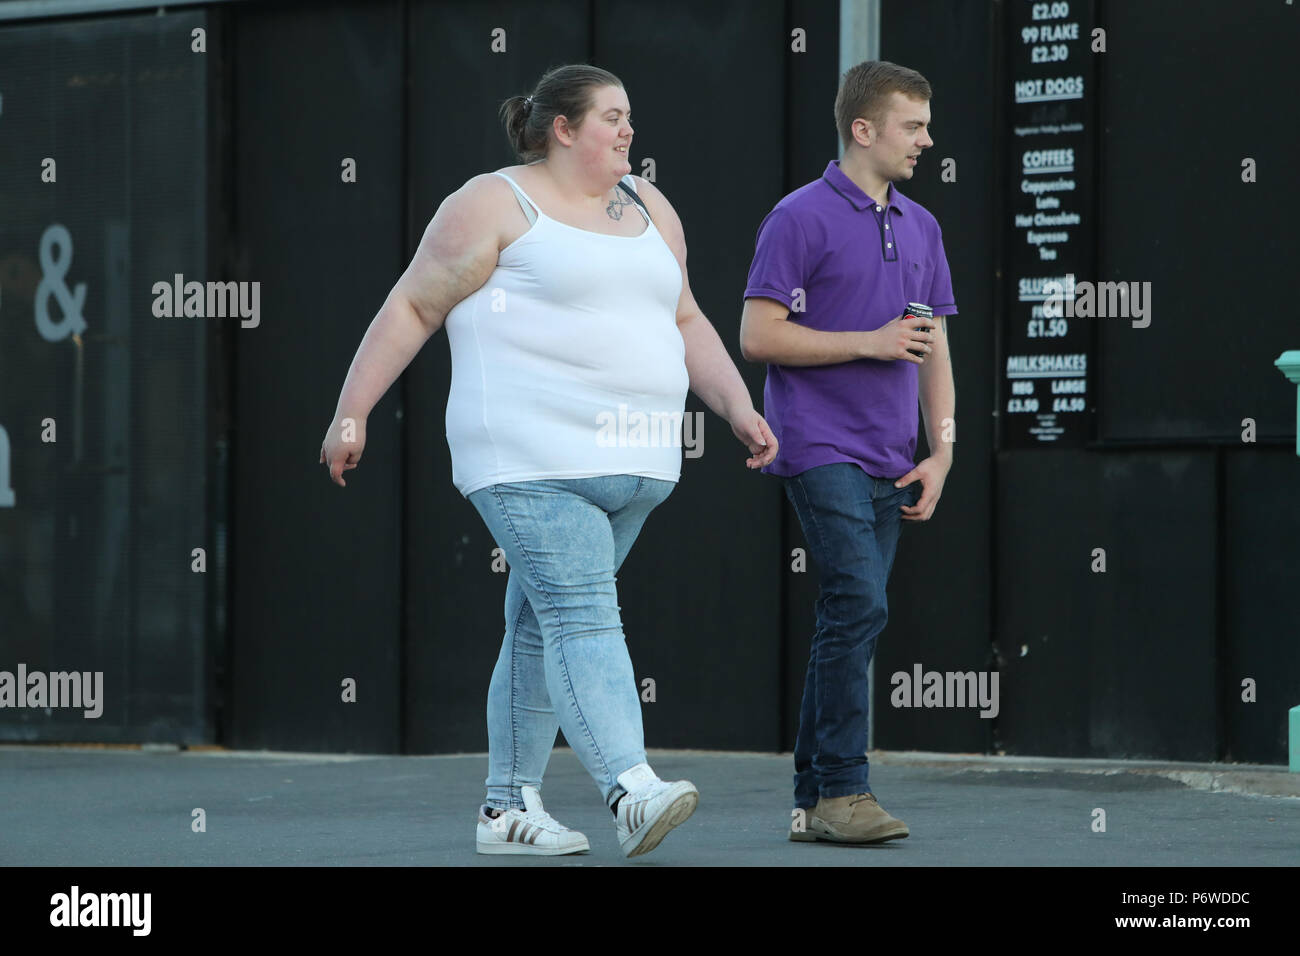 an-overweight-woman-walking-with-a-thin-man-P6WDDC.jpg